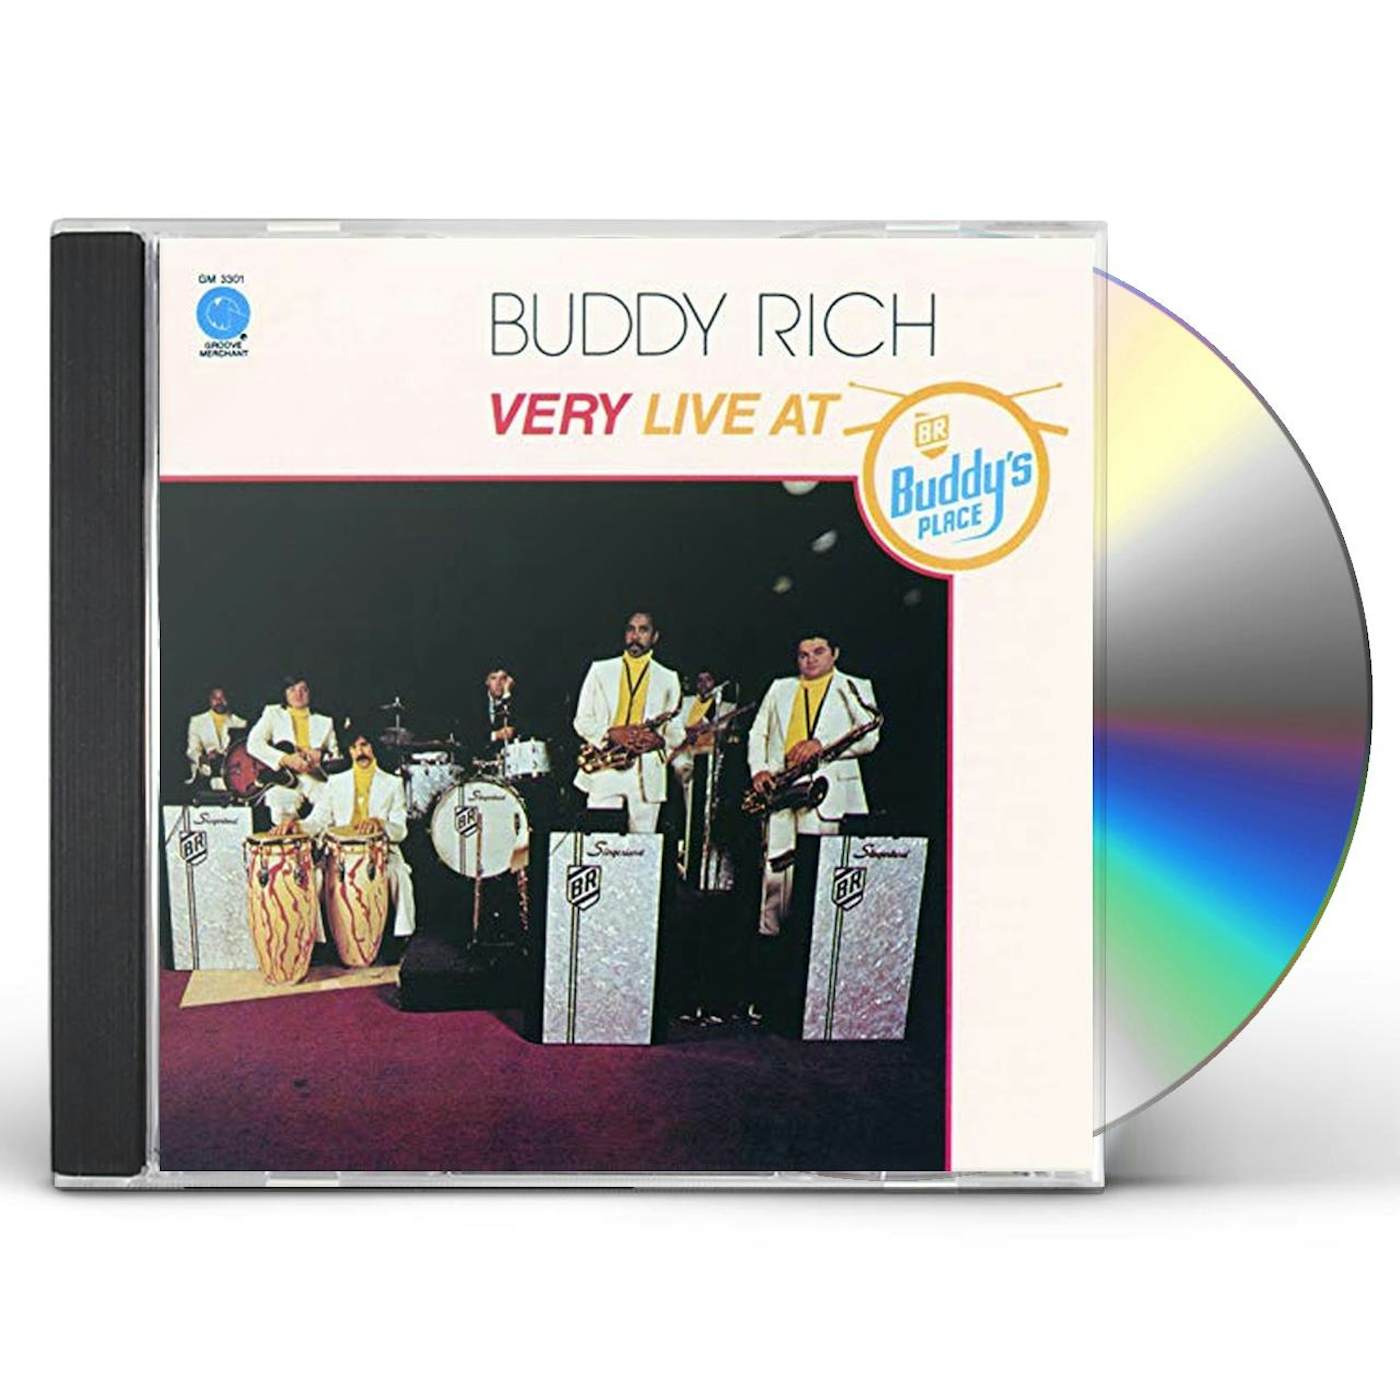 Buddy Rich VERY LIVE AT BUDDY'S PLACE CD